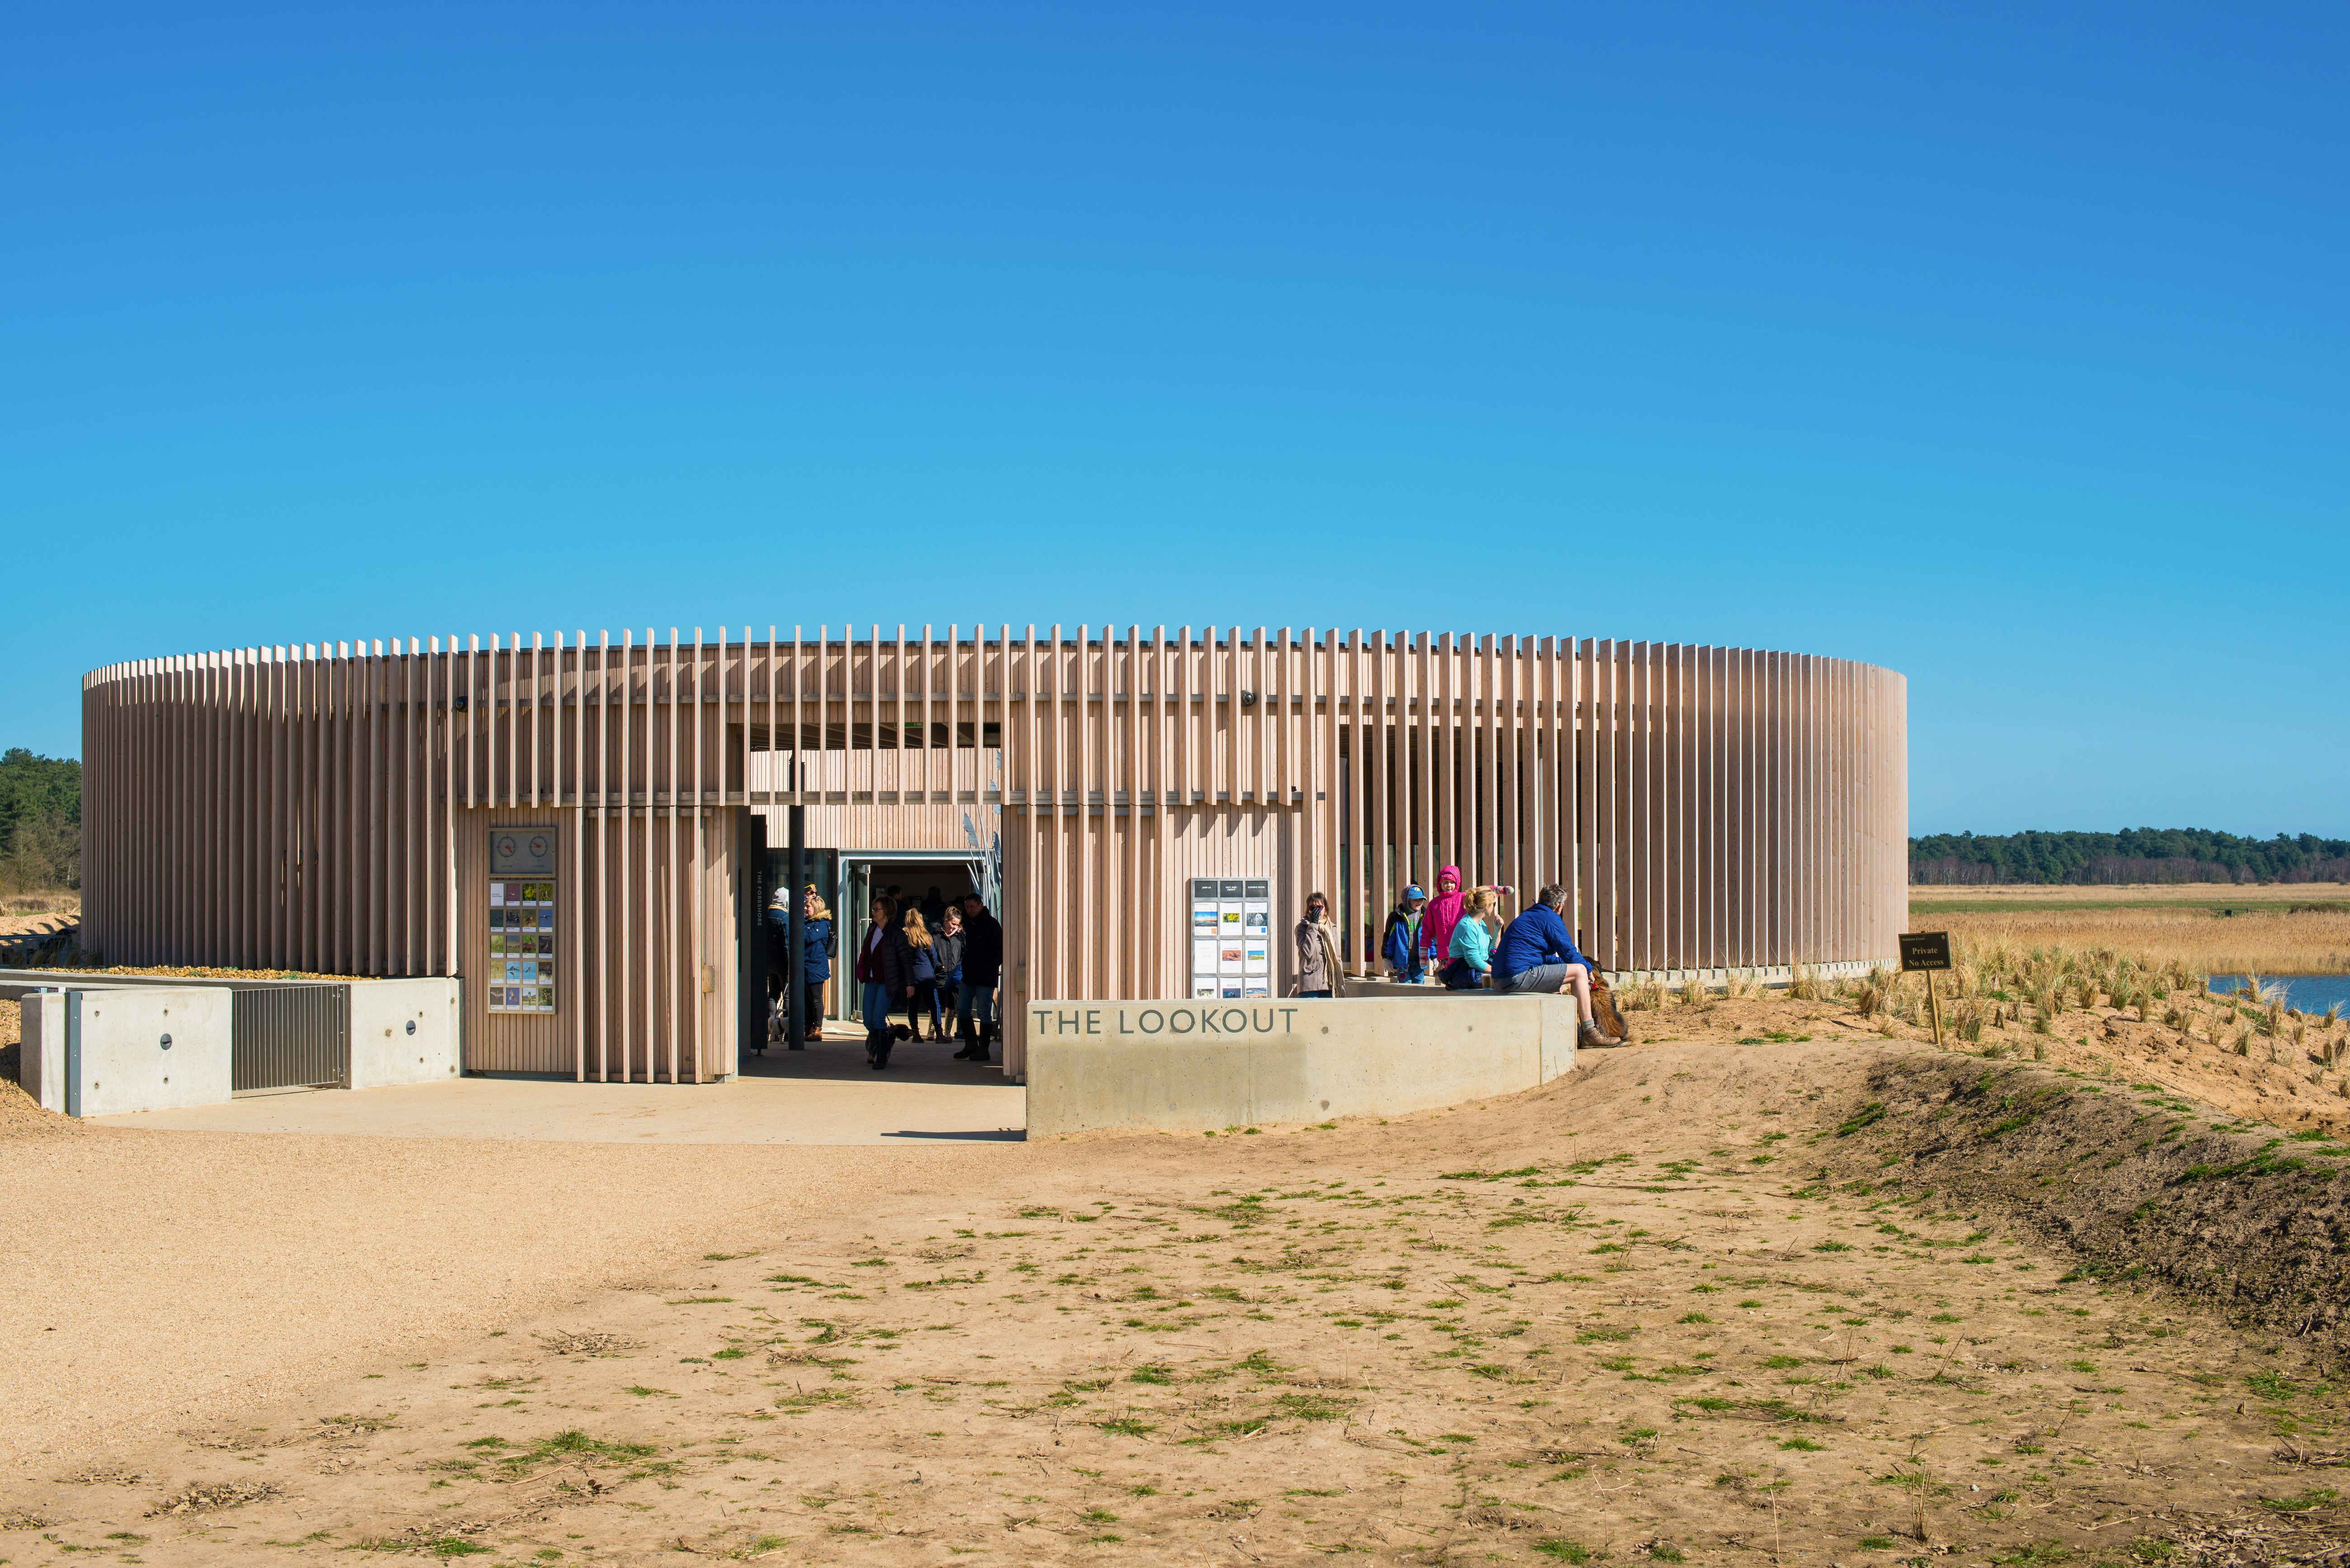 A circular, one-story building in a pinkish tan color with evenly spaced vertical strips of wood surrounding the exterior sits on a matching brown scrub plain in East Anglia, England. A row of tourists in colorful windbreakers sit on a low wall to the right, while just inside the door several figures stand in shadow. 